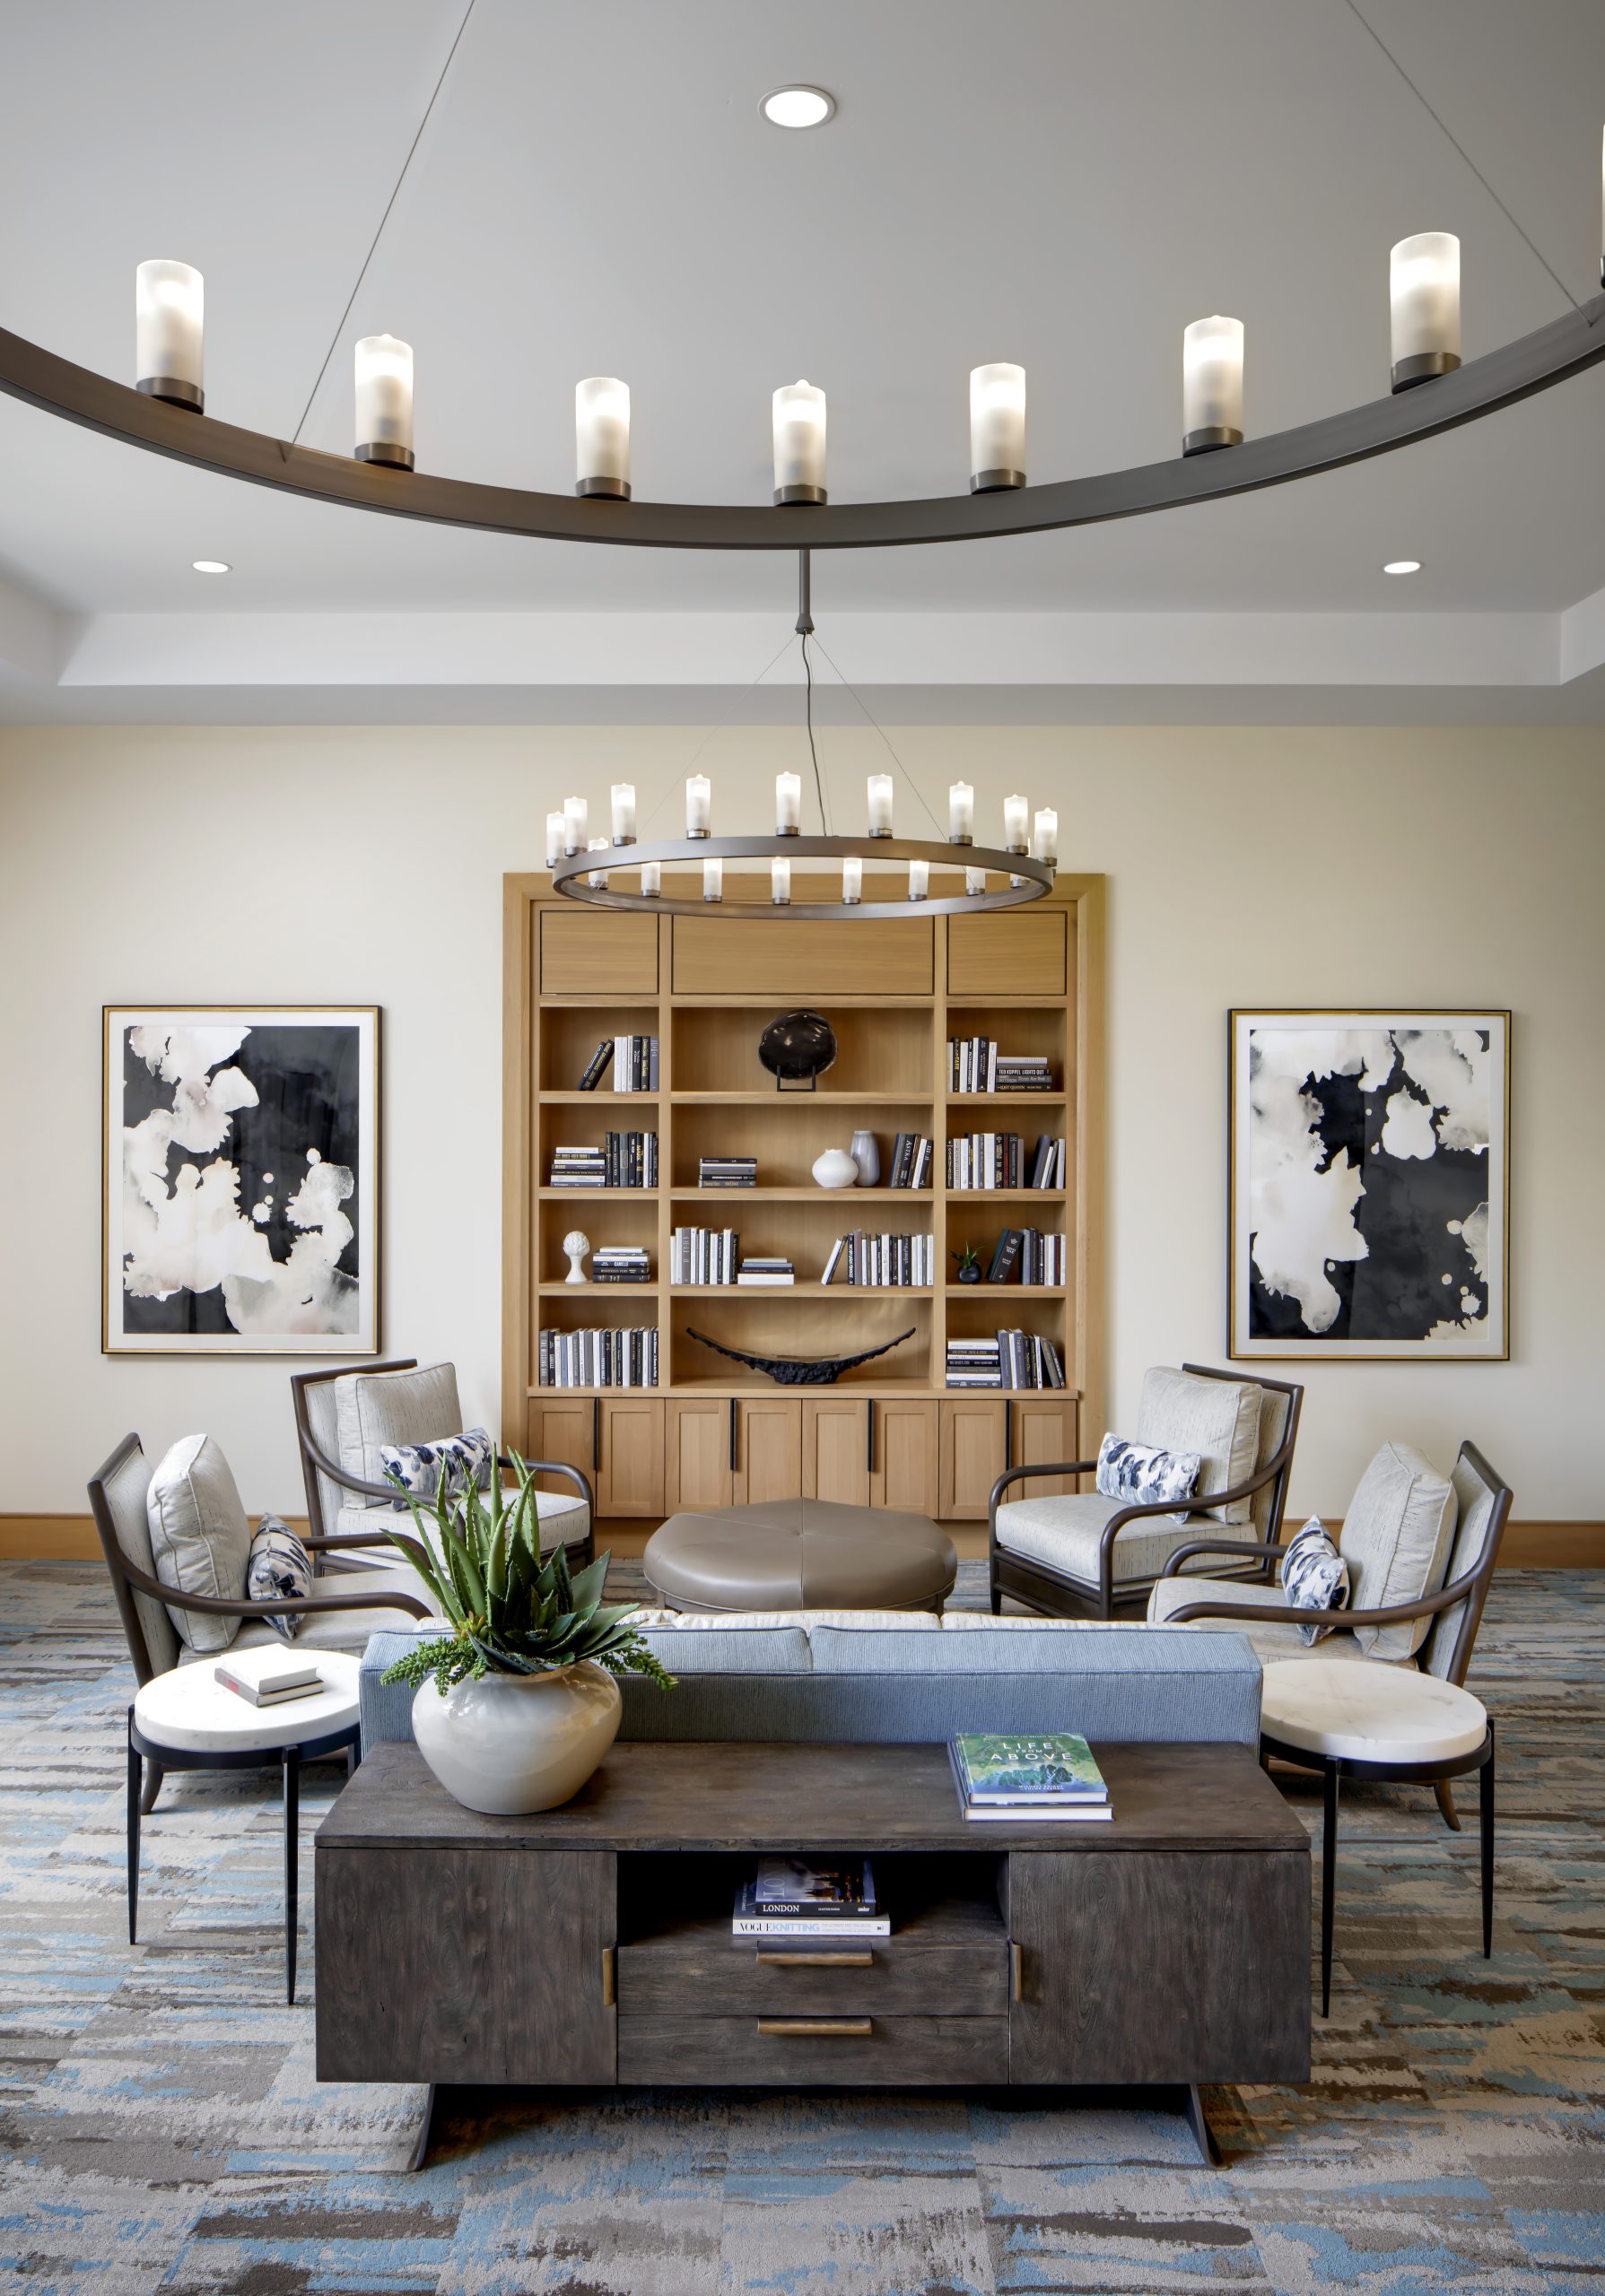 A spacious living room adorned with a sizable round chandelier, illuminating the elegant space.